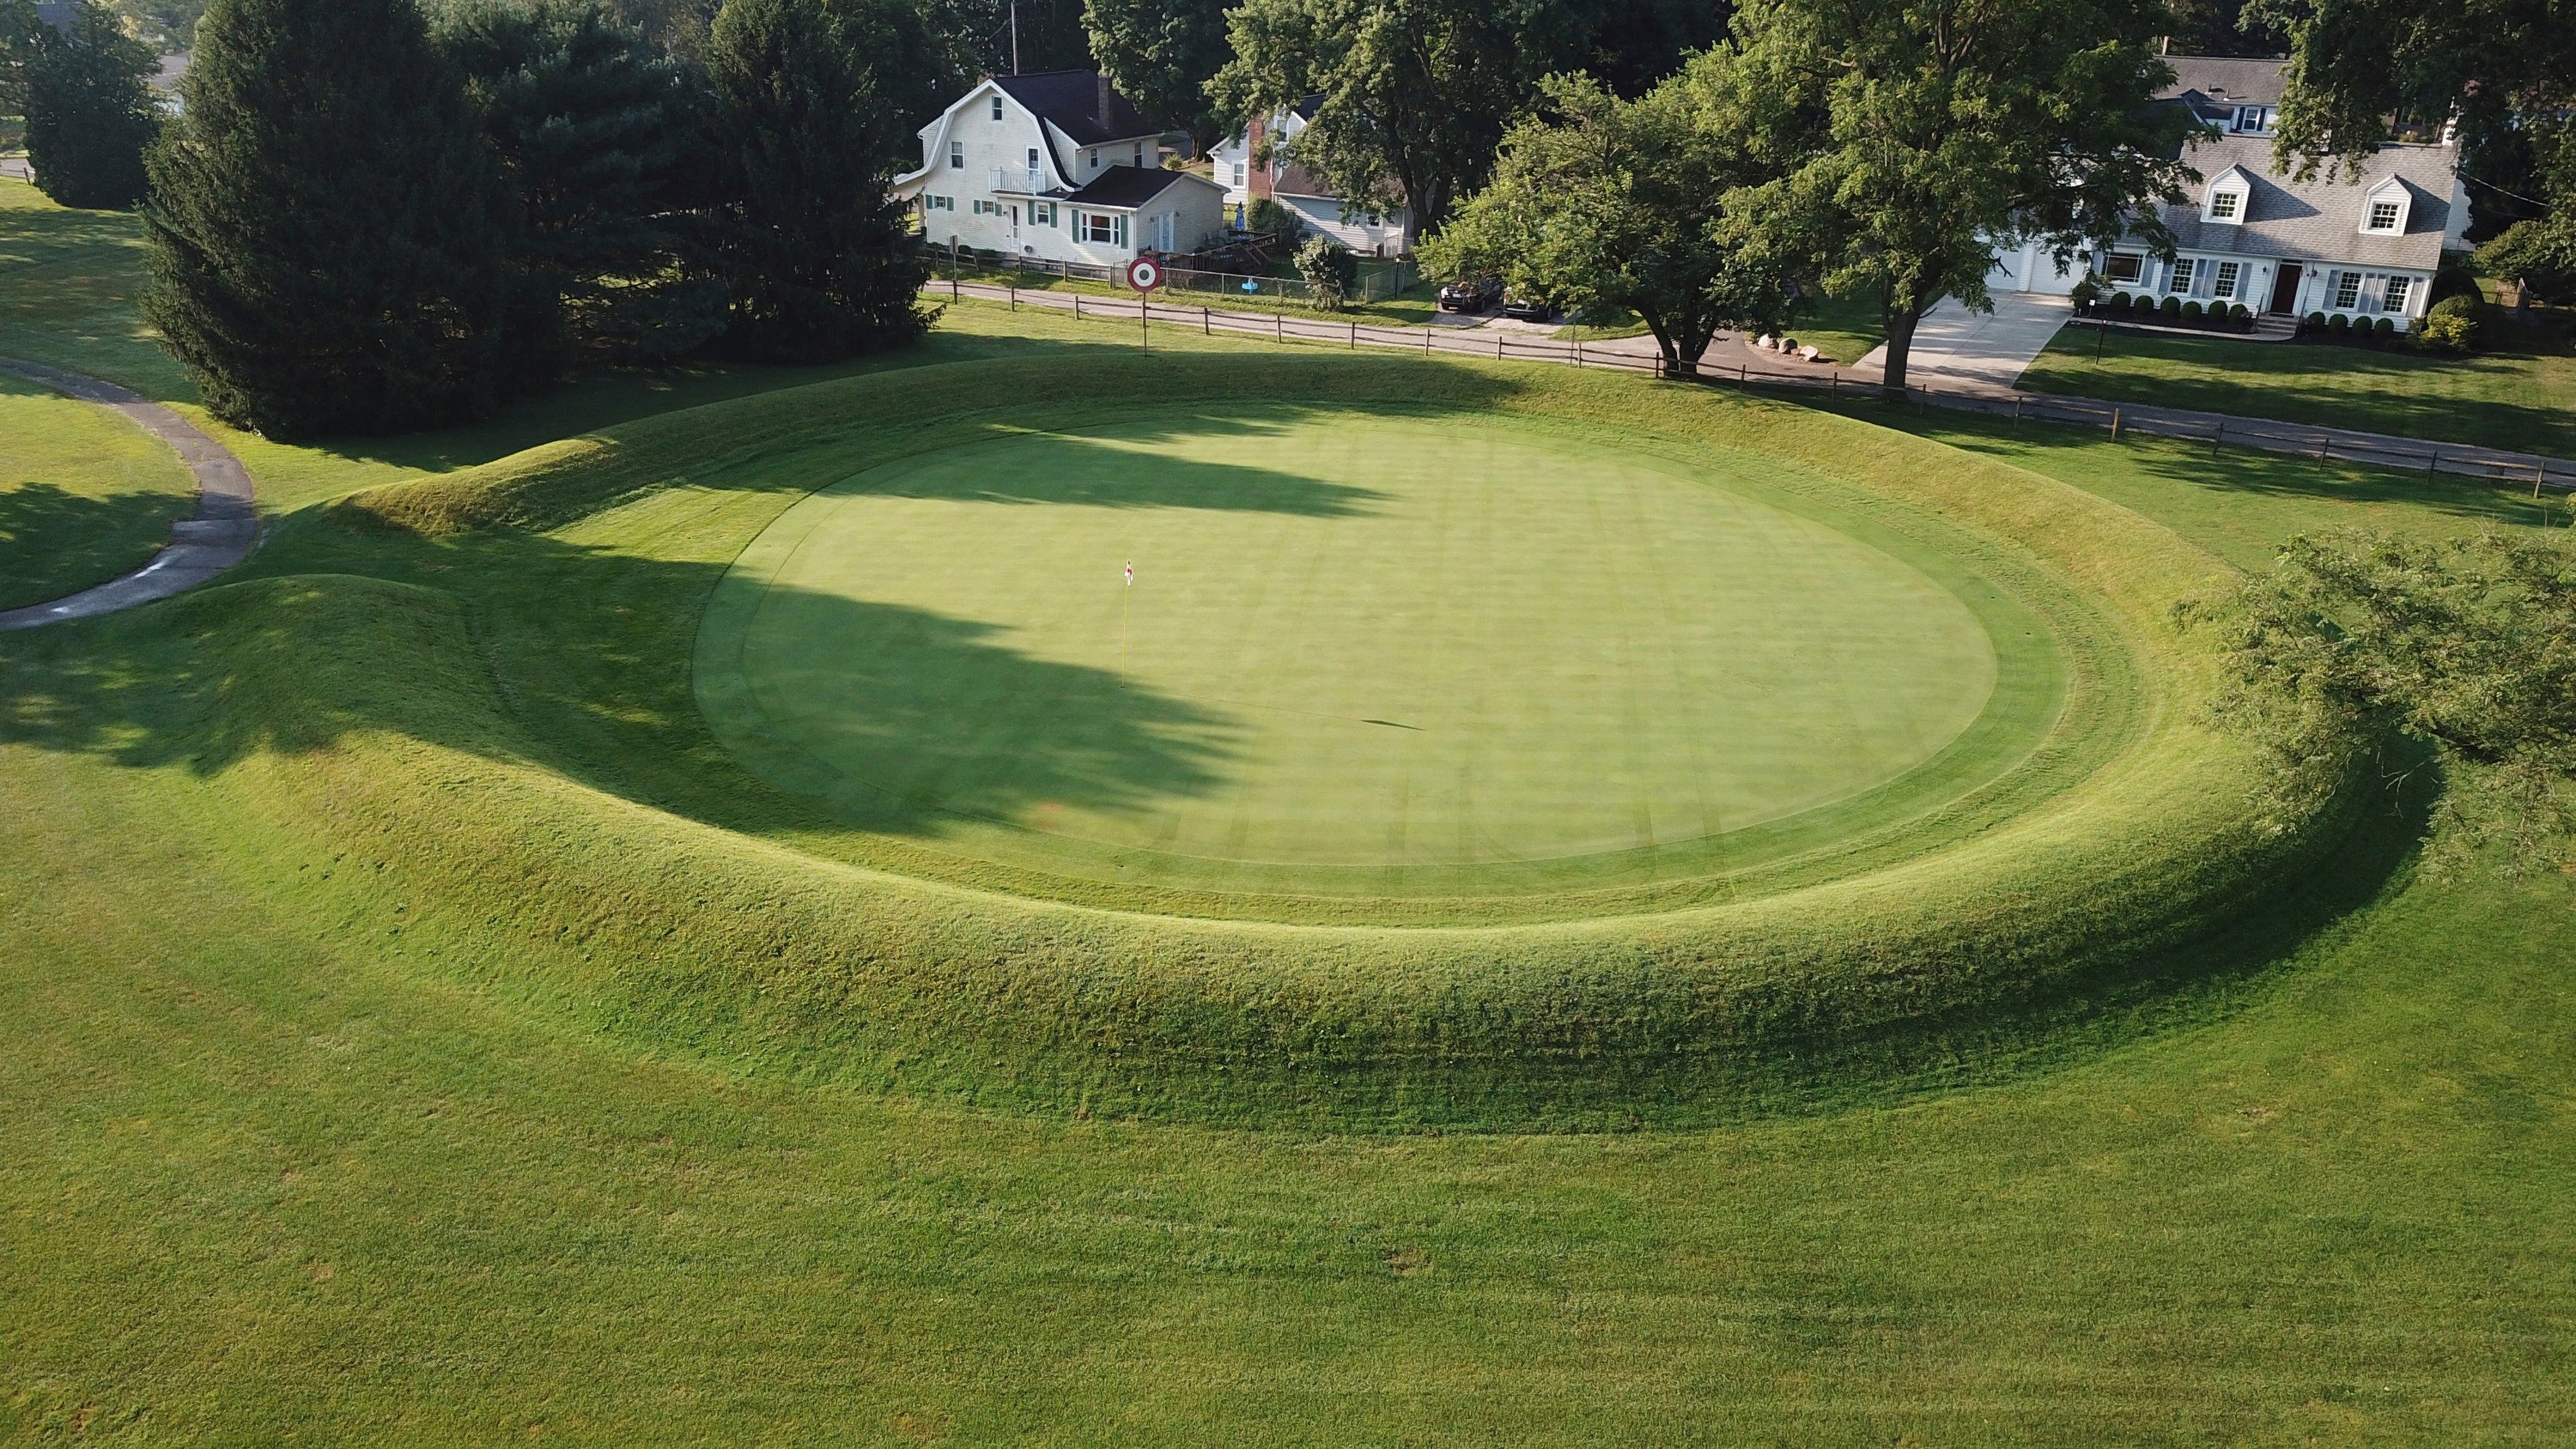 This photo made on July 30, 2019 shows a 155 ft. diameter circular enclosure around hole number 3 at Moundbuilders Country Club at the Octagon Earthworks in Newark, Ohio.